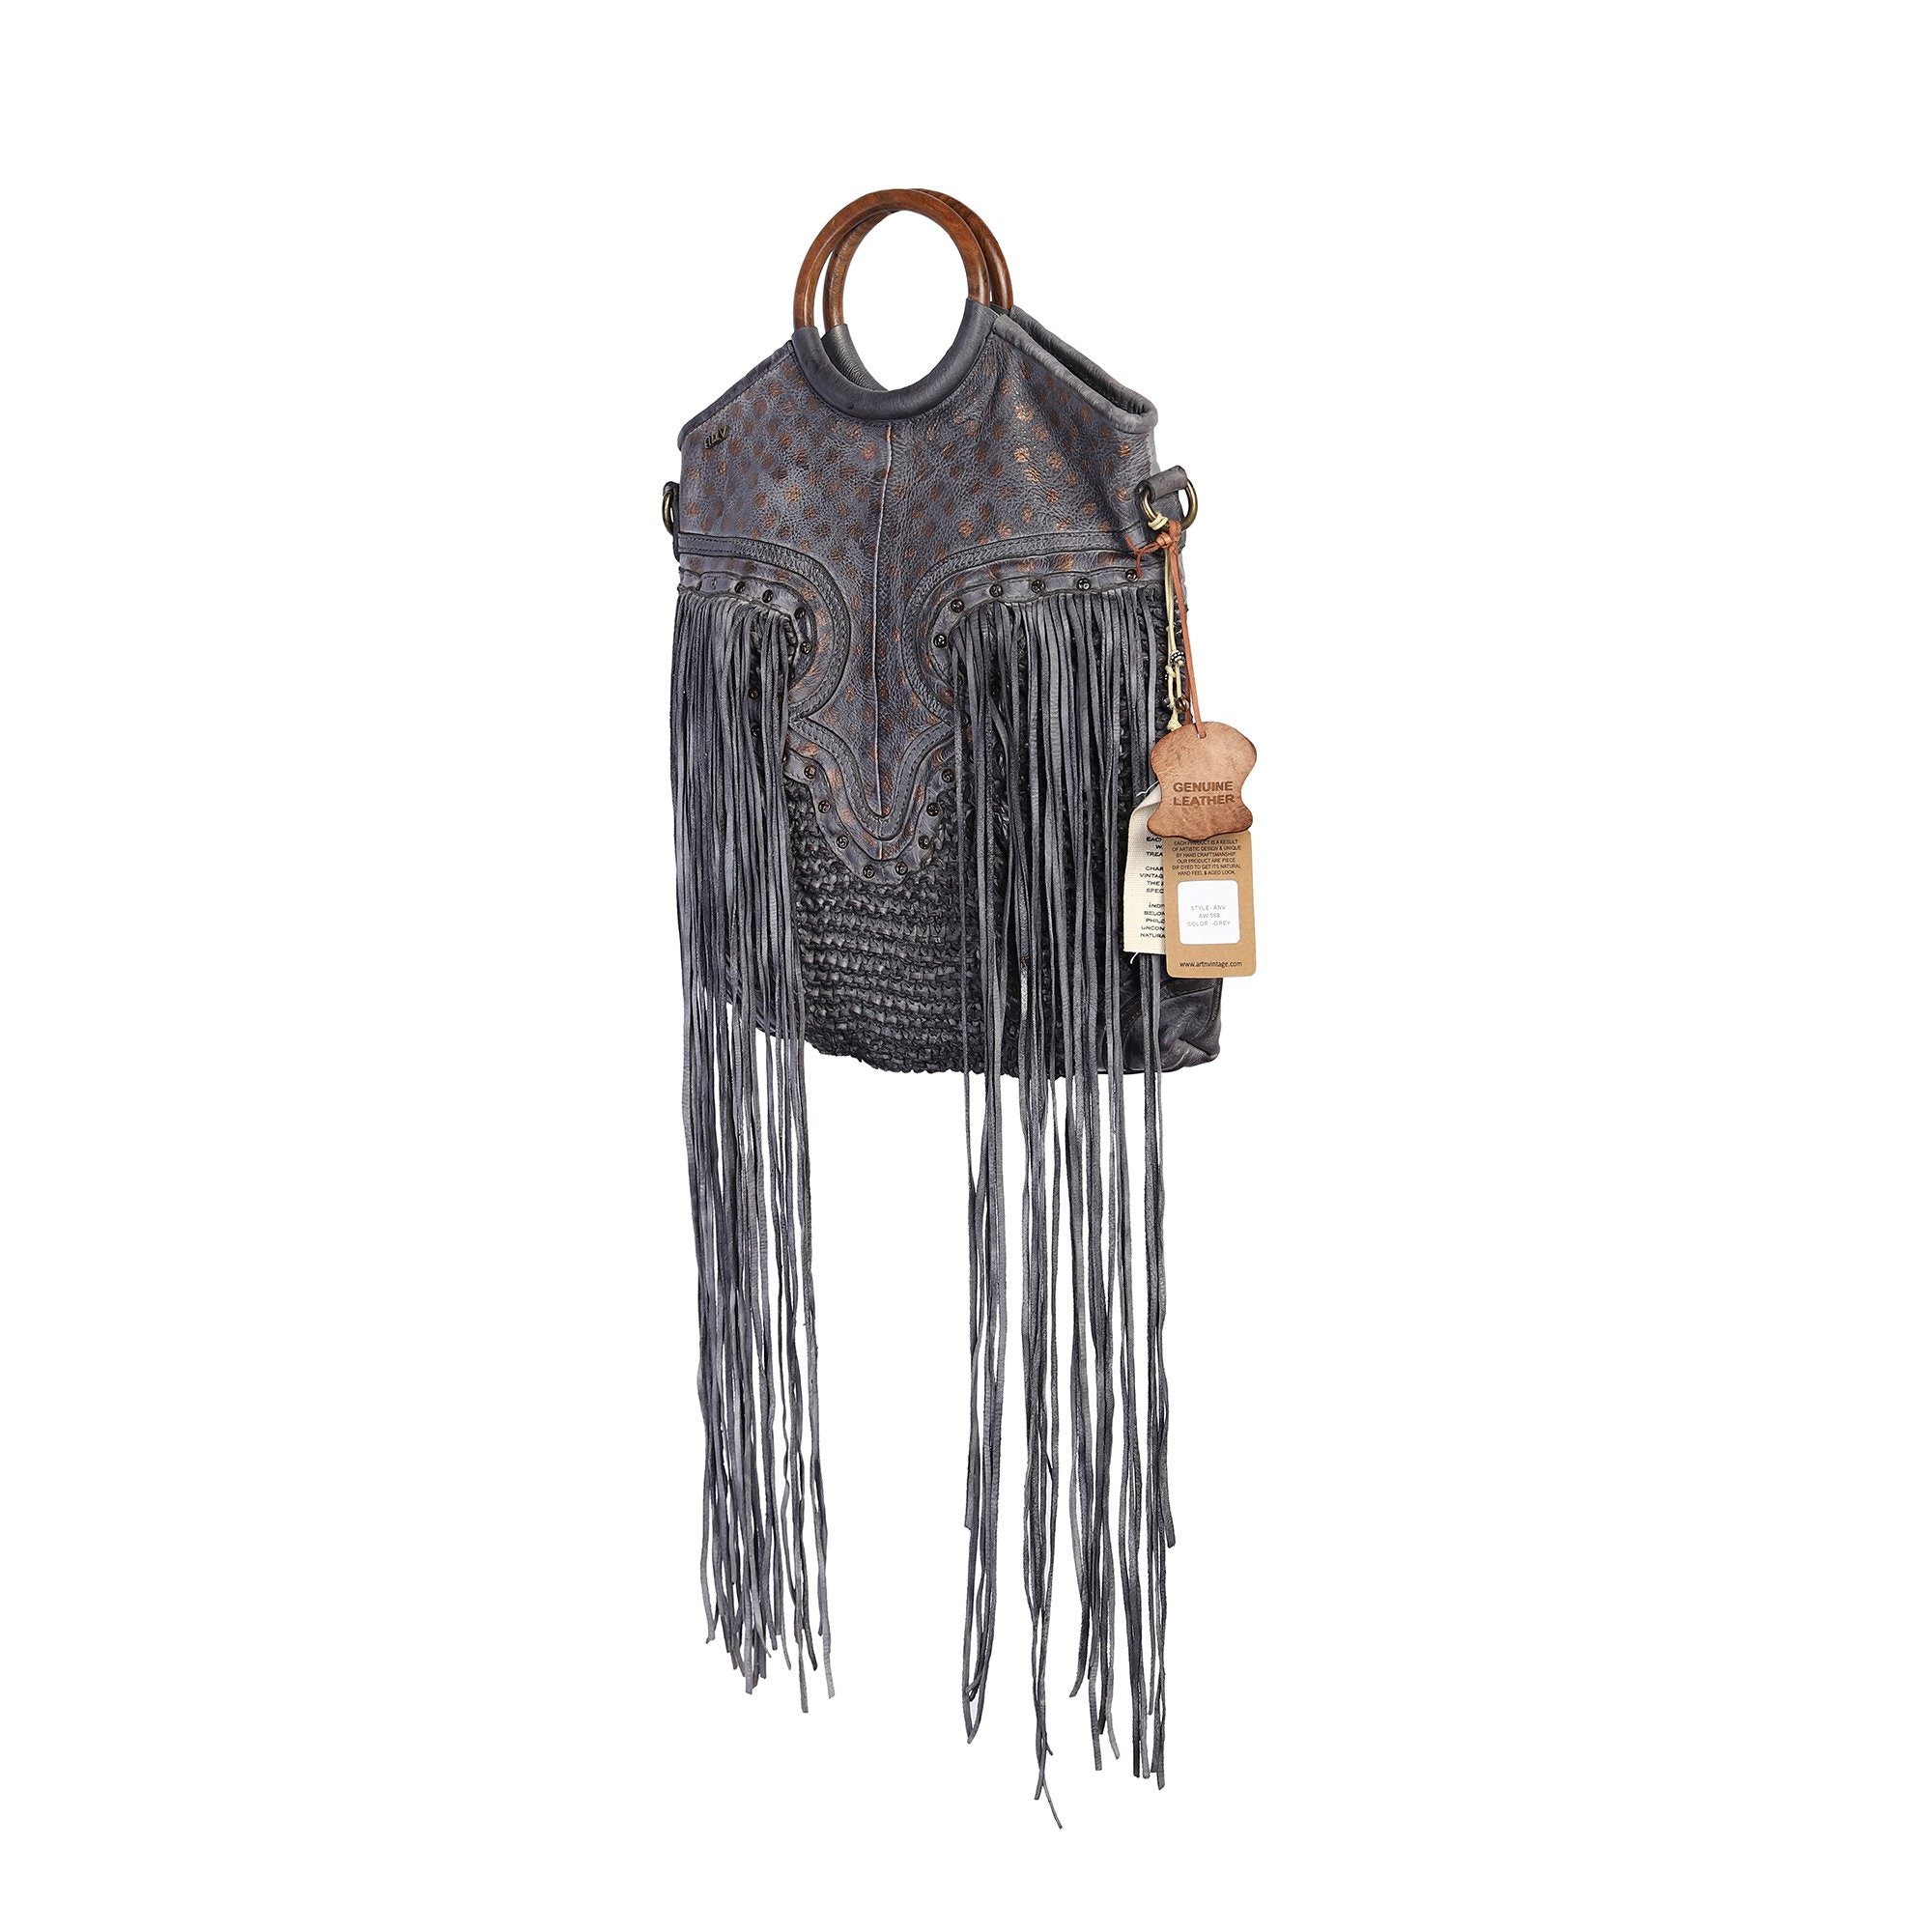 Martinka Designer Bag: Grey leather shopper with wooden handle with weaving, fringes and metallic print by Art N Vintage